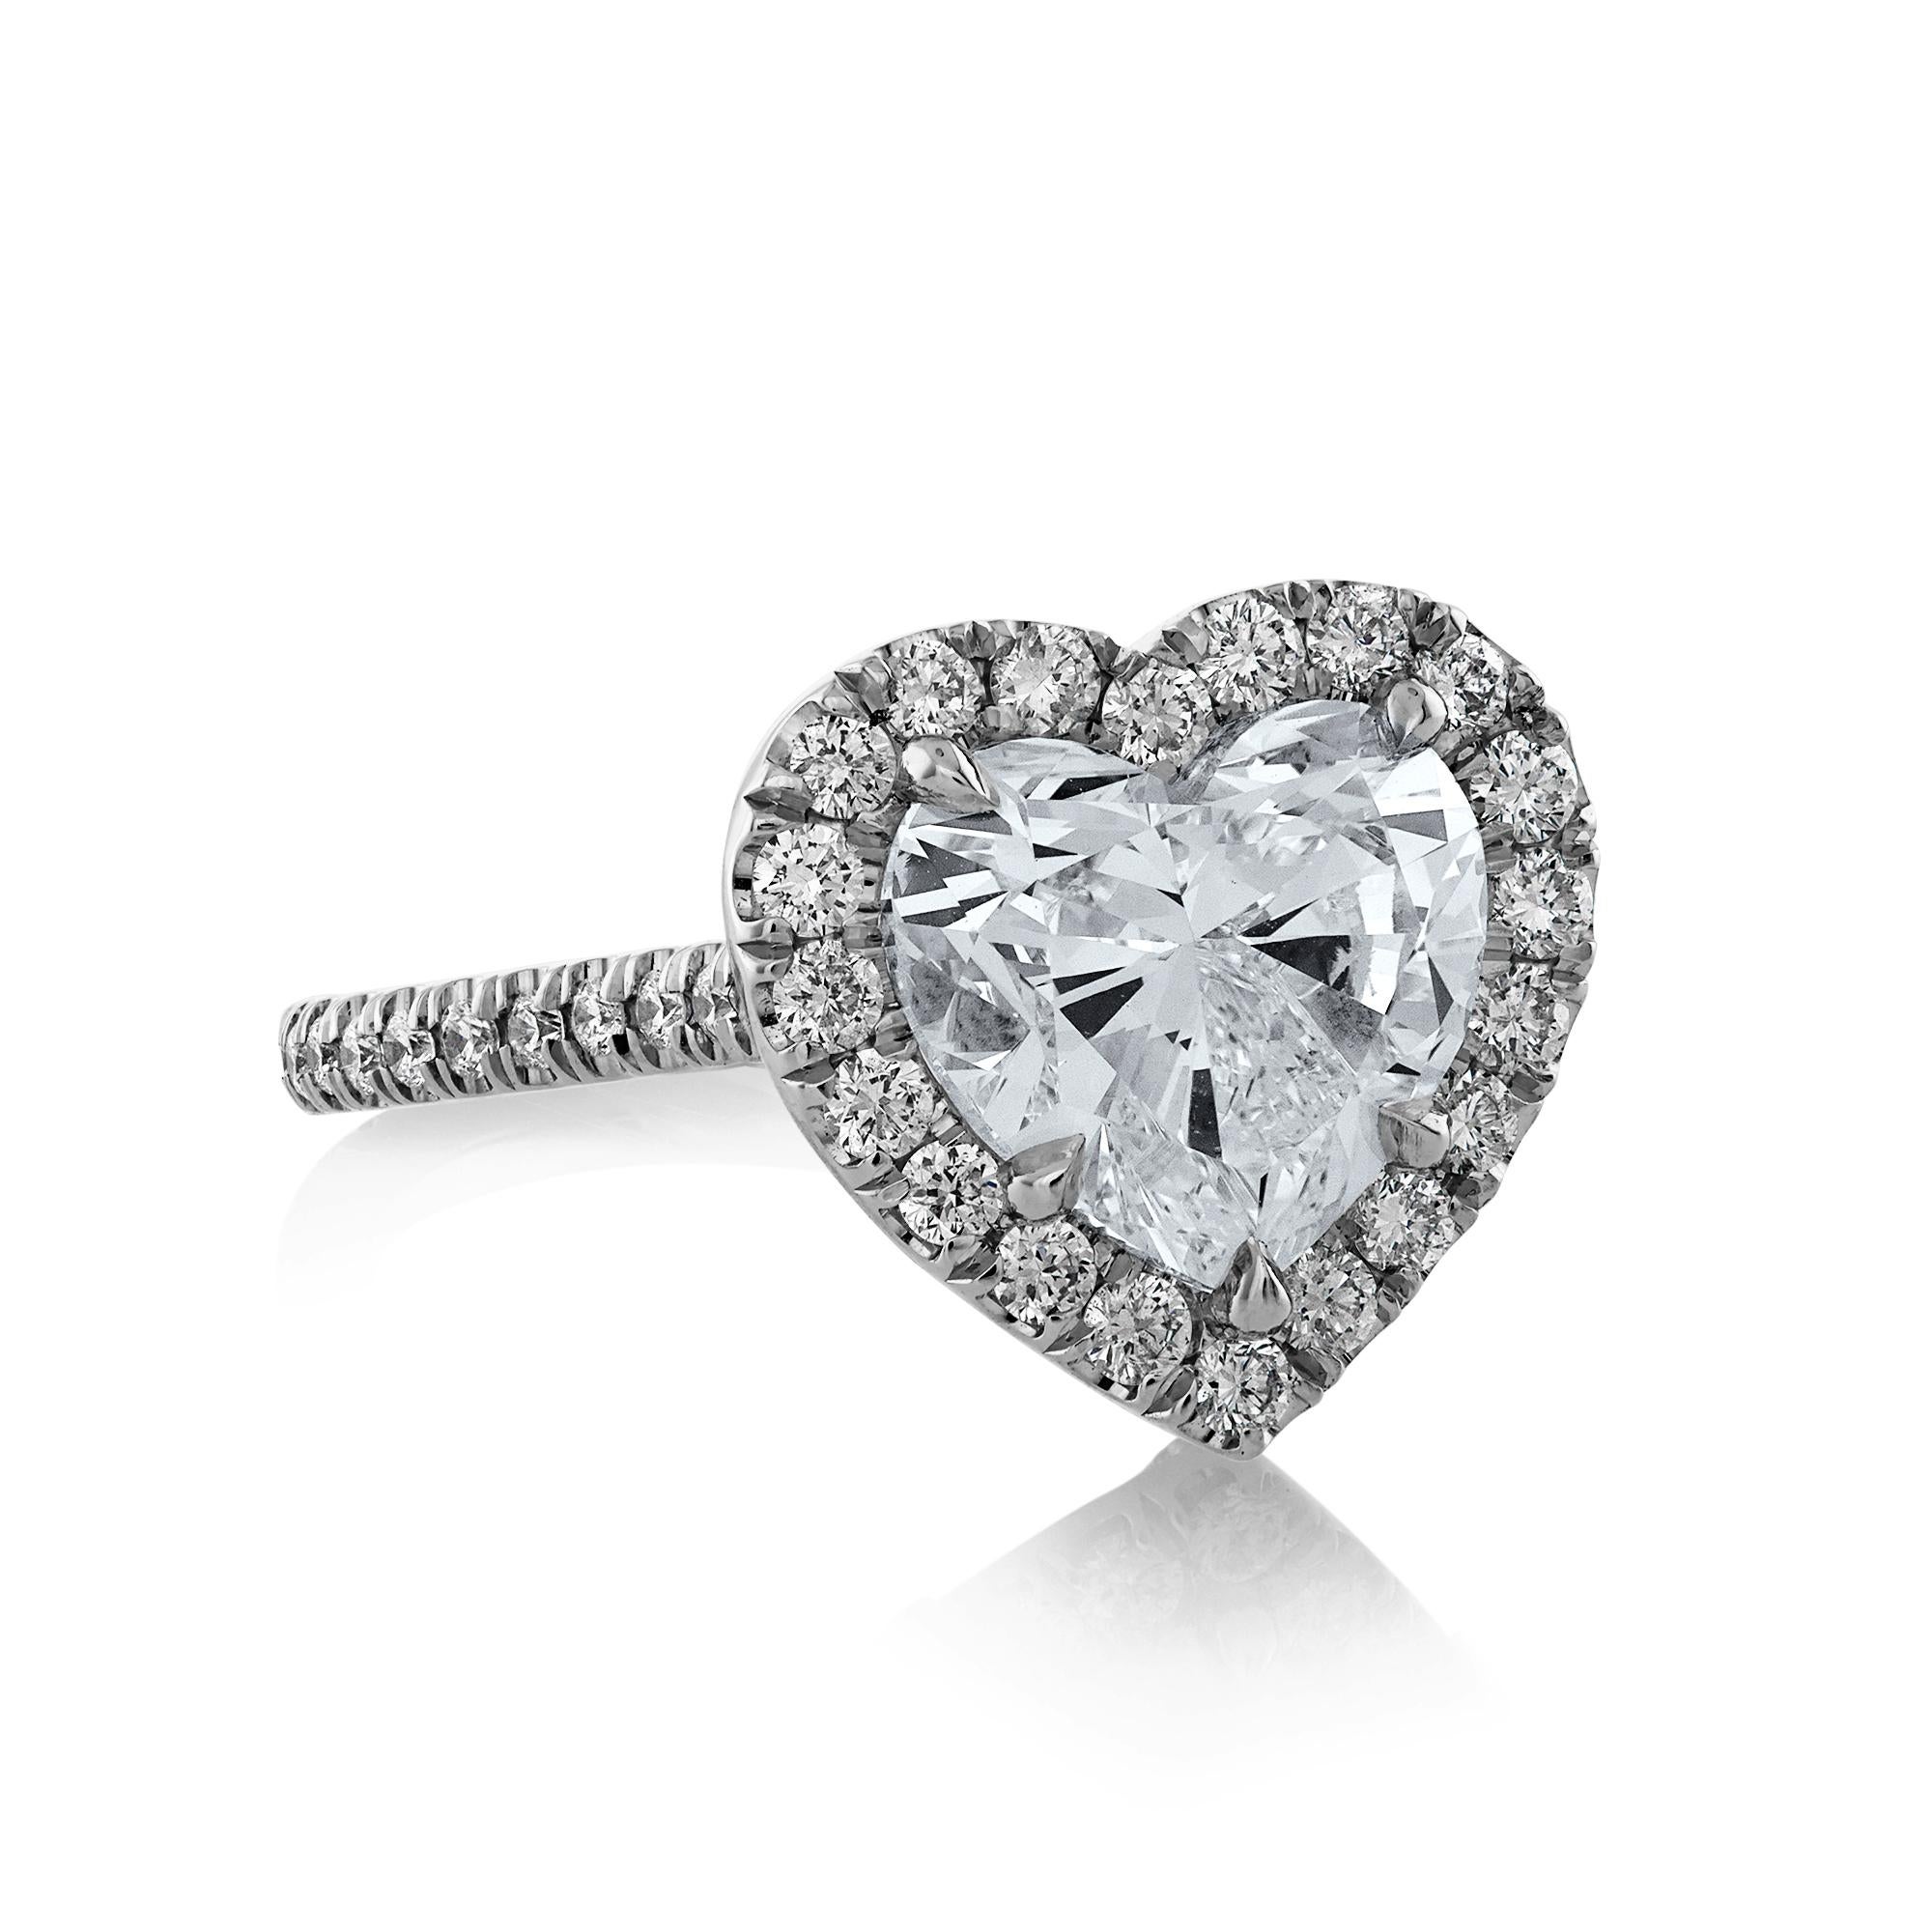 There is nothing more ROMANTIC than this exquisite 3.91ctw Heart Shaped Diamond Platinum Engagement Ring!
An icy-white, sleekly modeled HEART diamond is the center of attention. This century-old shape diamond, symbolizing love and devotion, weighing